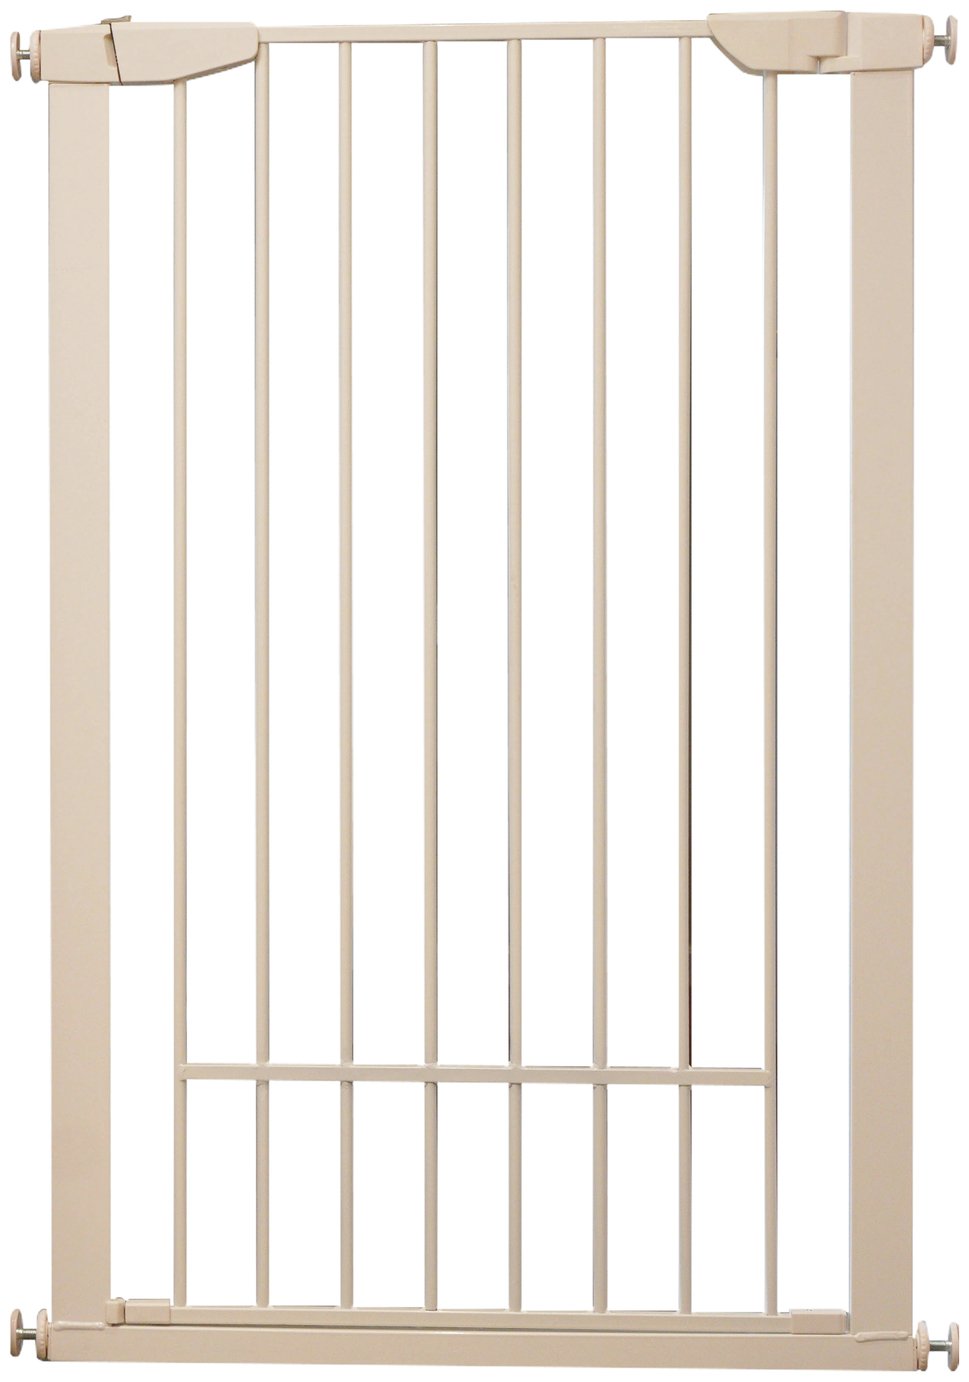 Extra Tall Pressure Fit Pet Gate - White